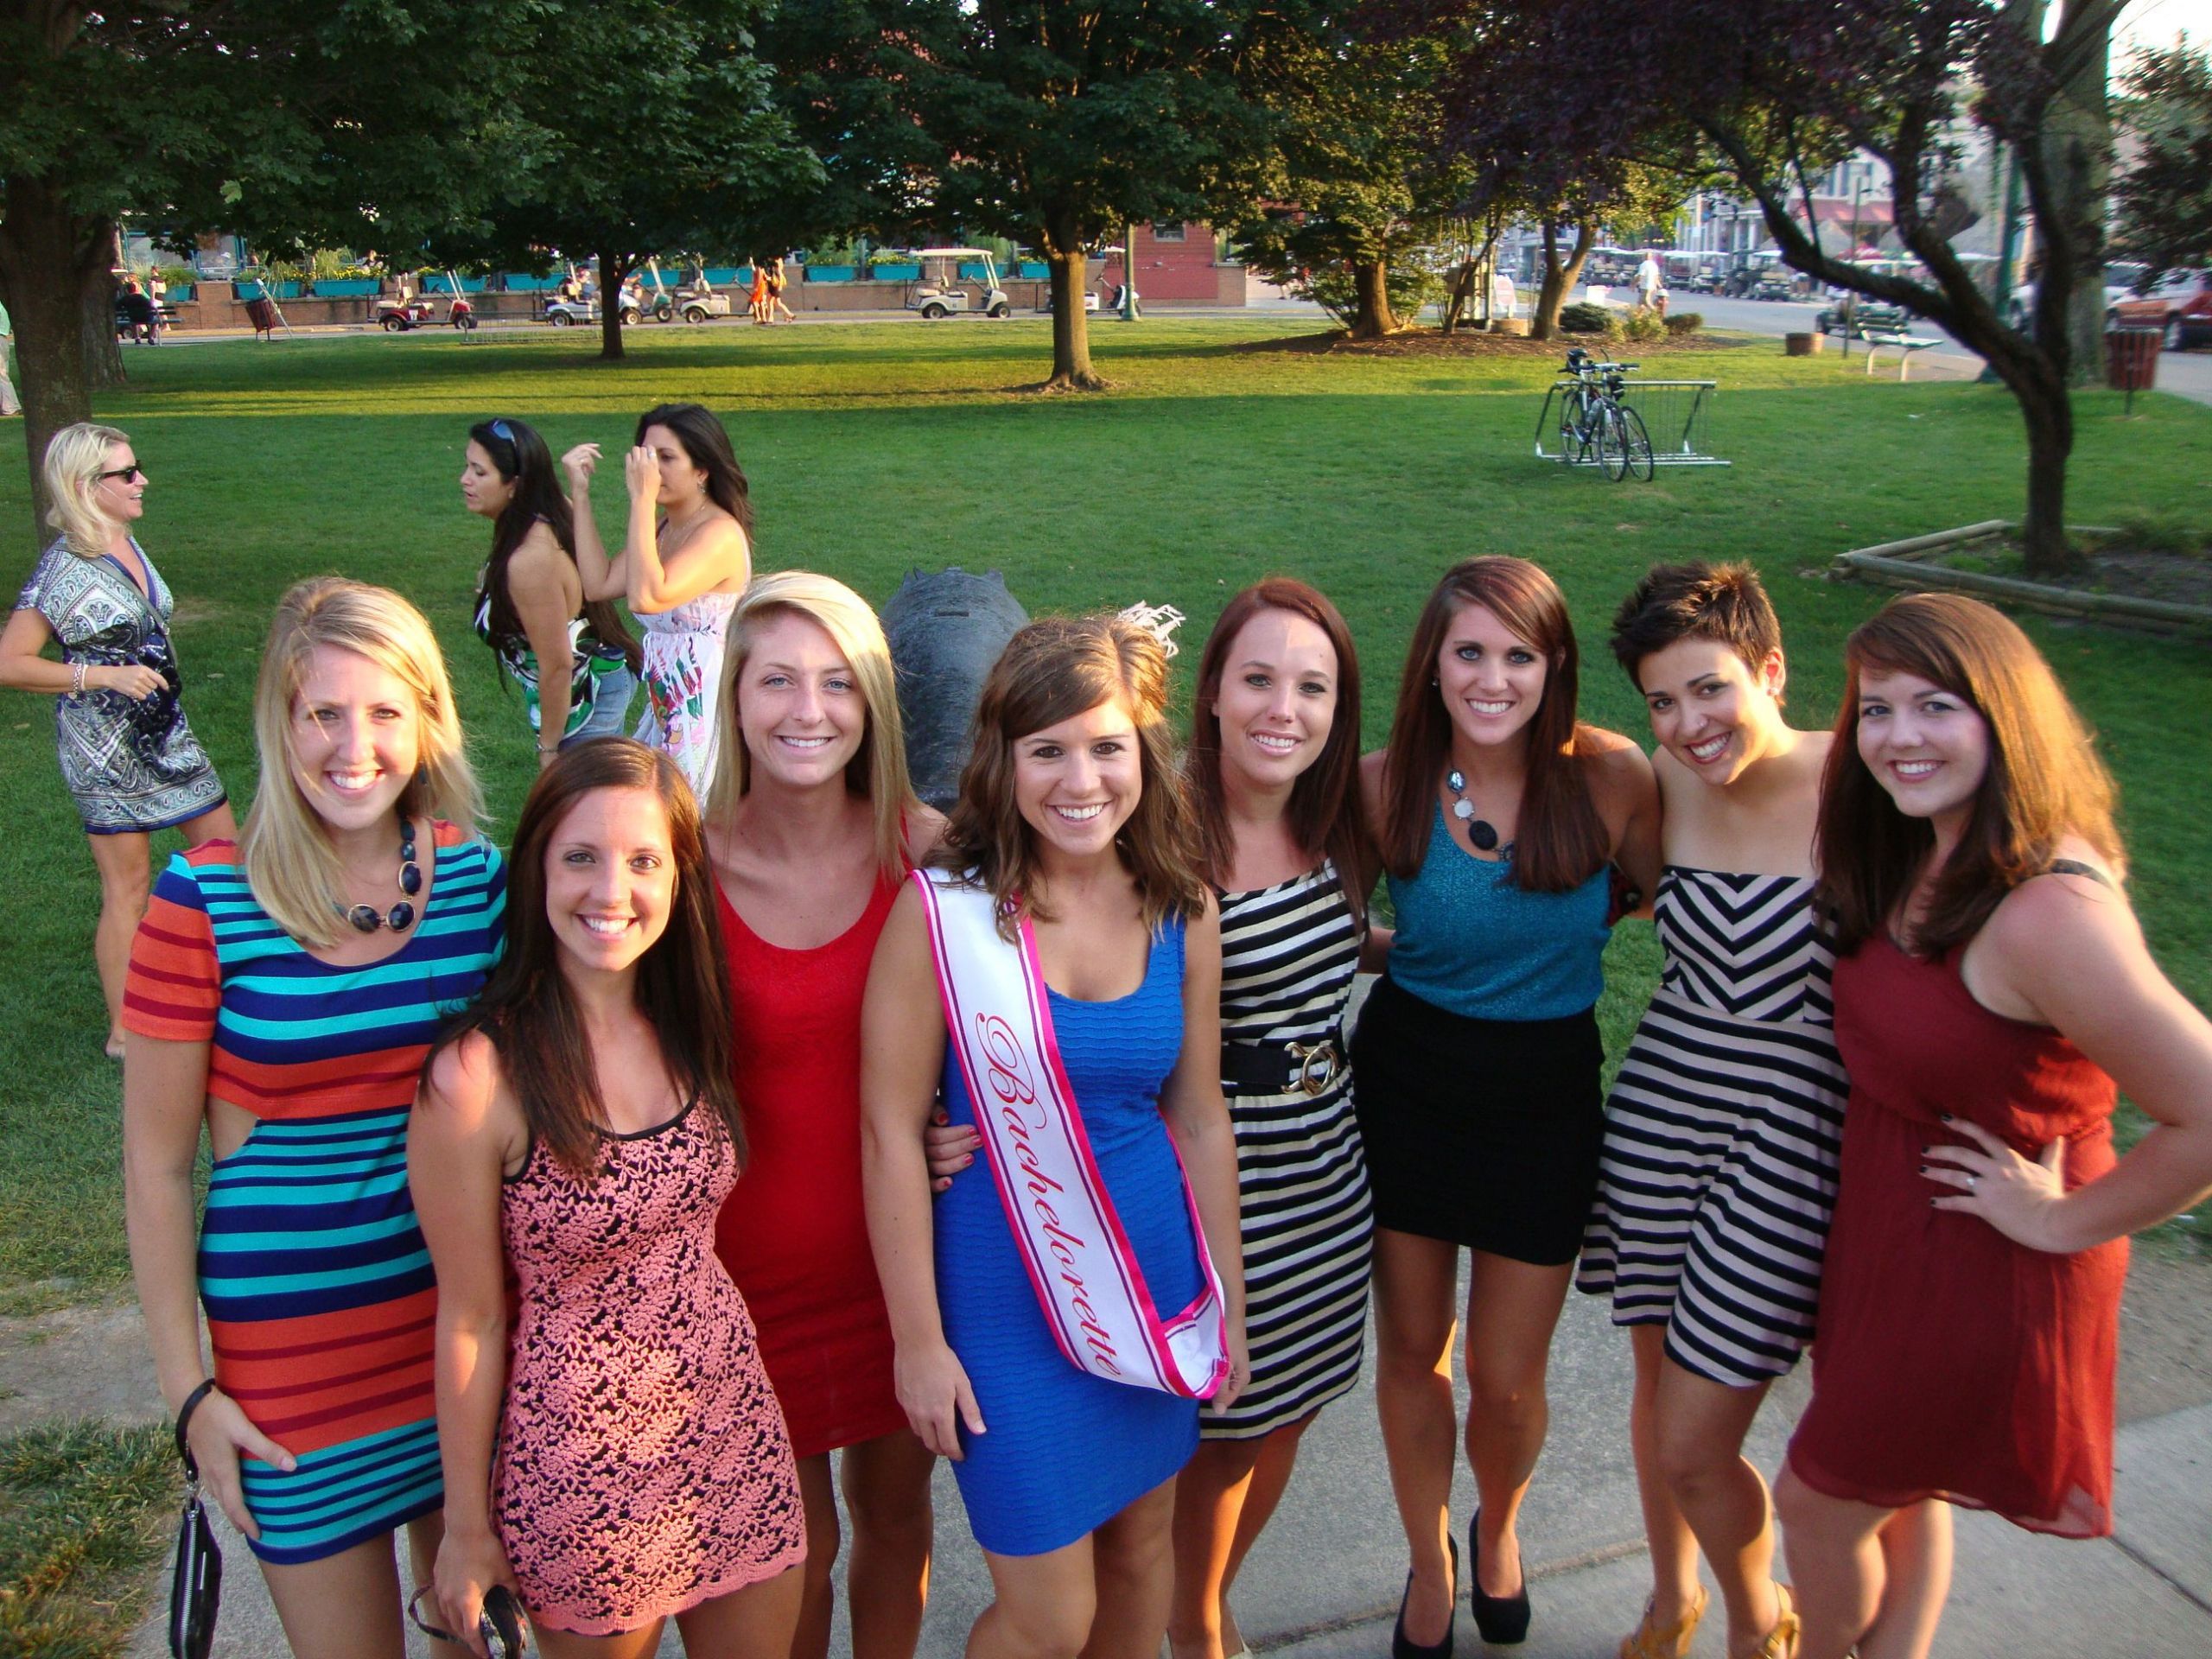 Midwest Bachelorette Party Ideas
 Midwest home of summer weekend bachelorette parties